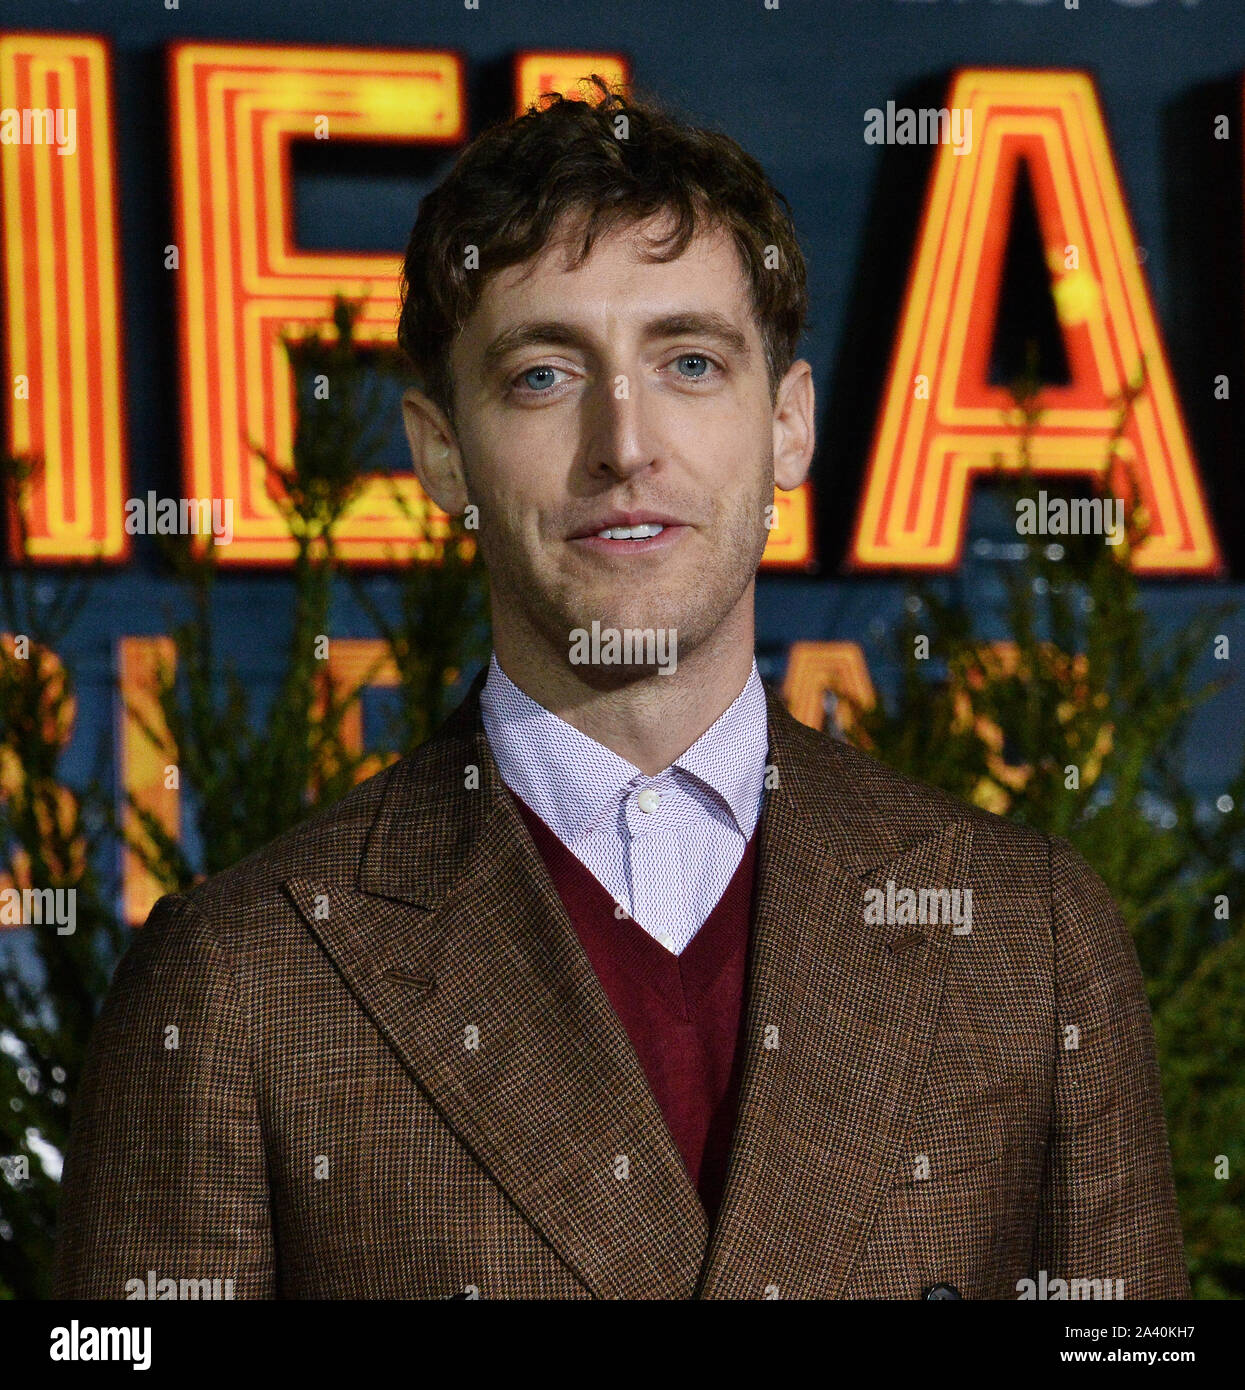 Los Angeles, United States. 10th Oct, 2019. Cast member Thomas Middleditch attends the premiere of the motion picture horror comedy 'Zombieland: Double Tap' at the Regency Village Theatre in the Westwood section of Los Angeles on Thursday, October 10, 2019. Storyline: Columbus, Tallahassee, Wichita, and Little Rock move to the American heartland as they face off against evolved zombies, fellow survivors, and the growing pains of the snarky makeshift family. Photo by Jim Ruymen/UPI Credit: UPI/Alamy Live News Stock Photo